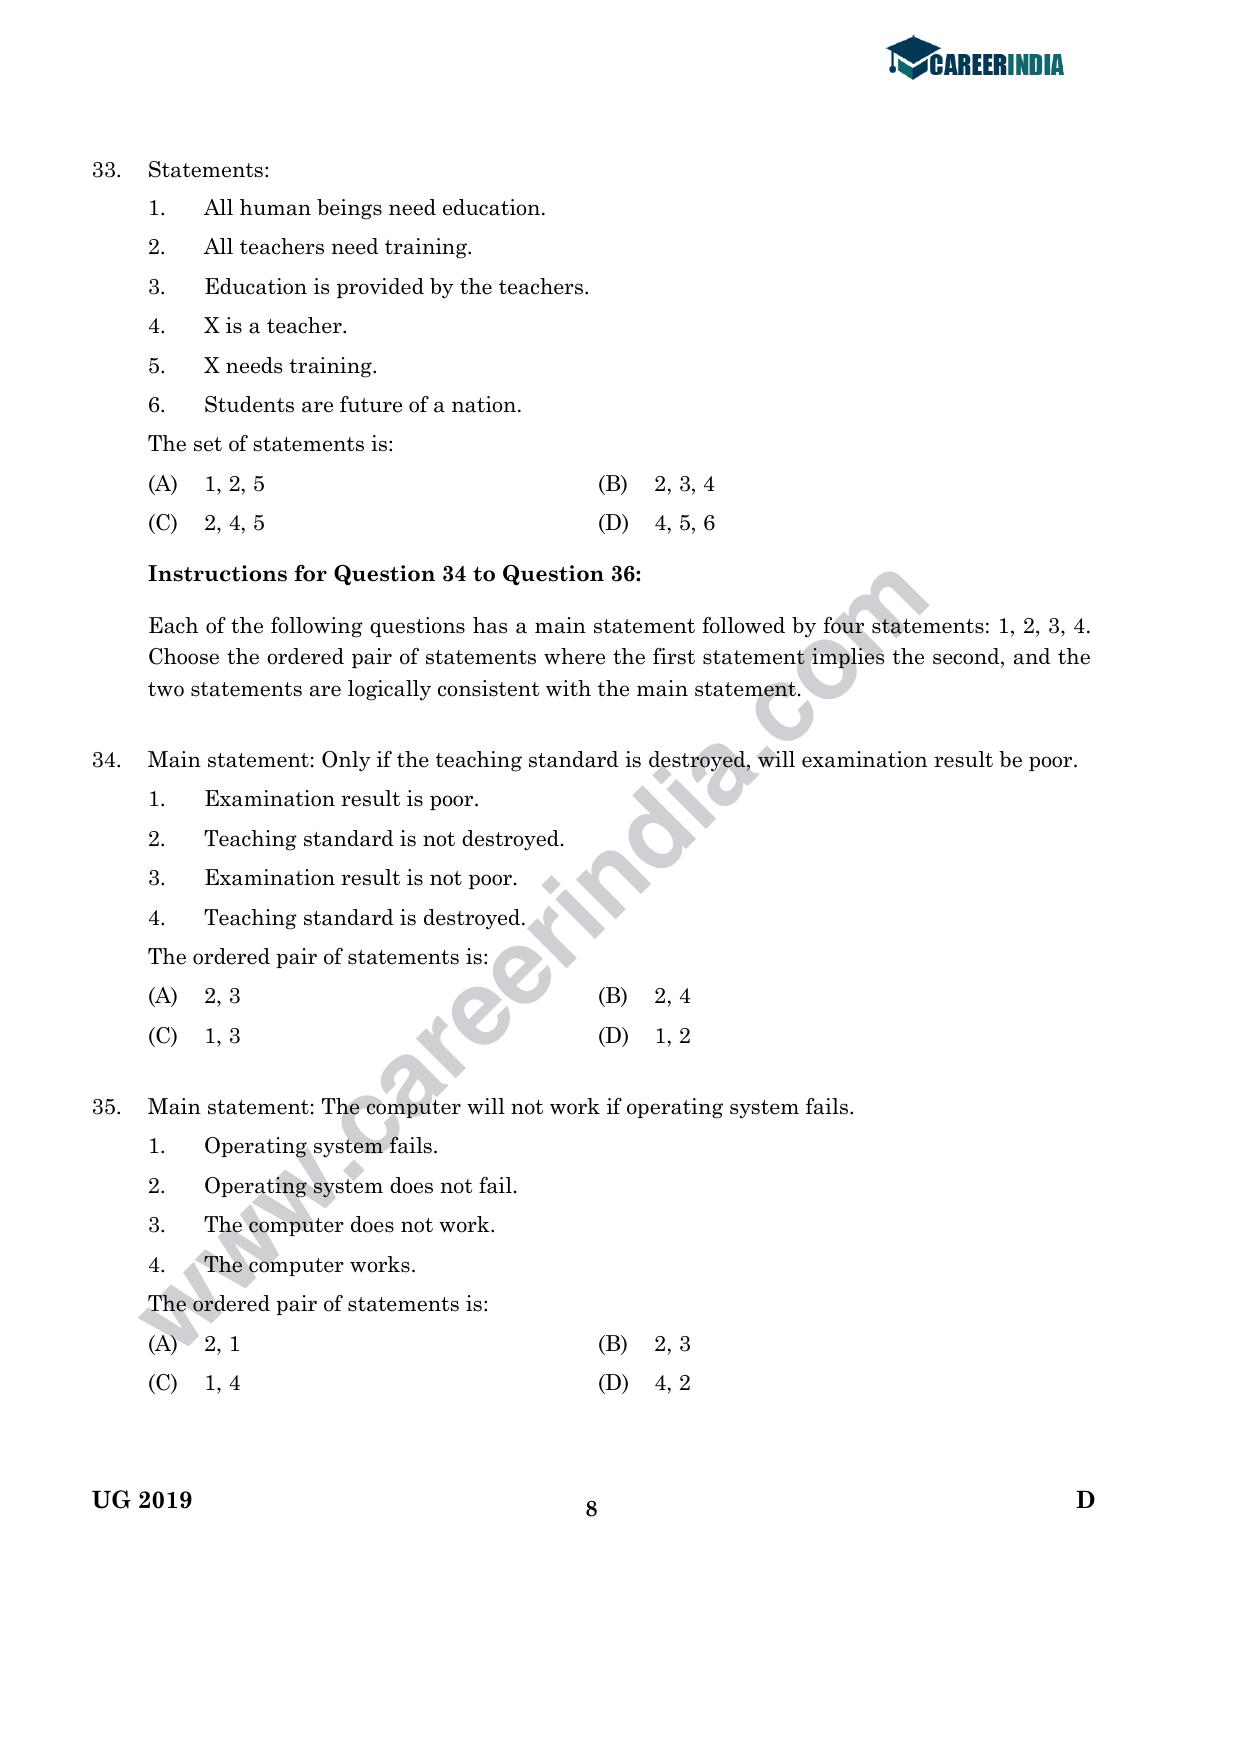 CLAT 2019 UG Logical-Reasoning Question Paper - Page 7